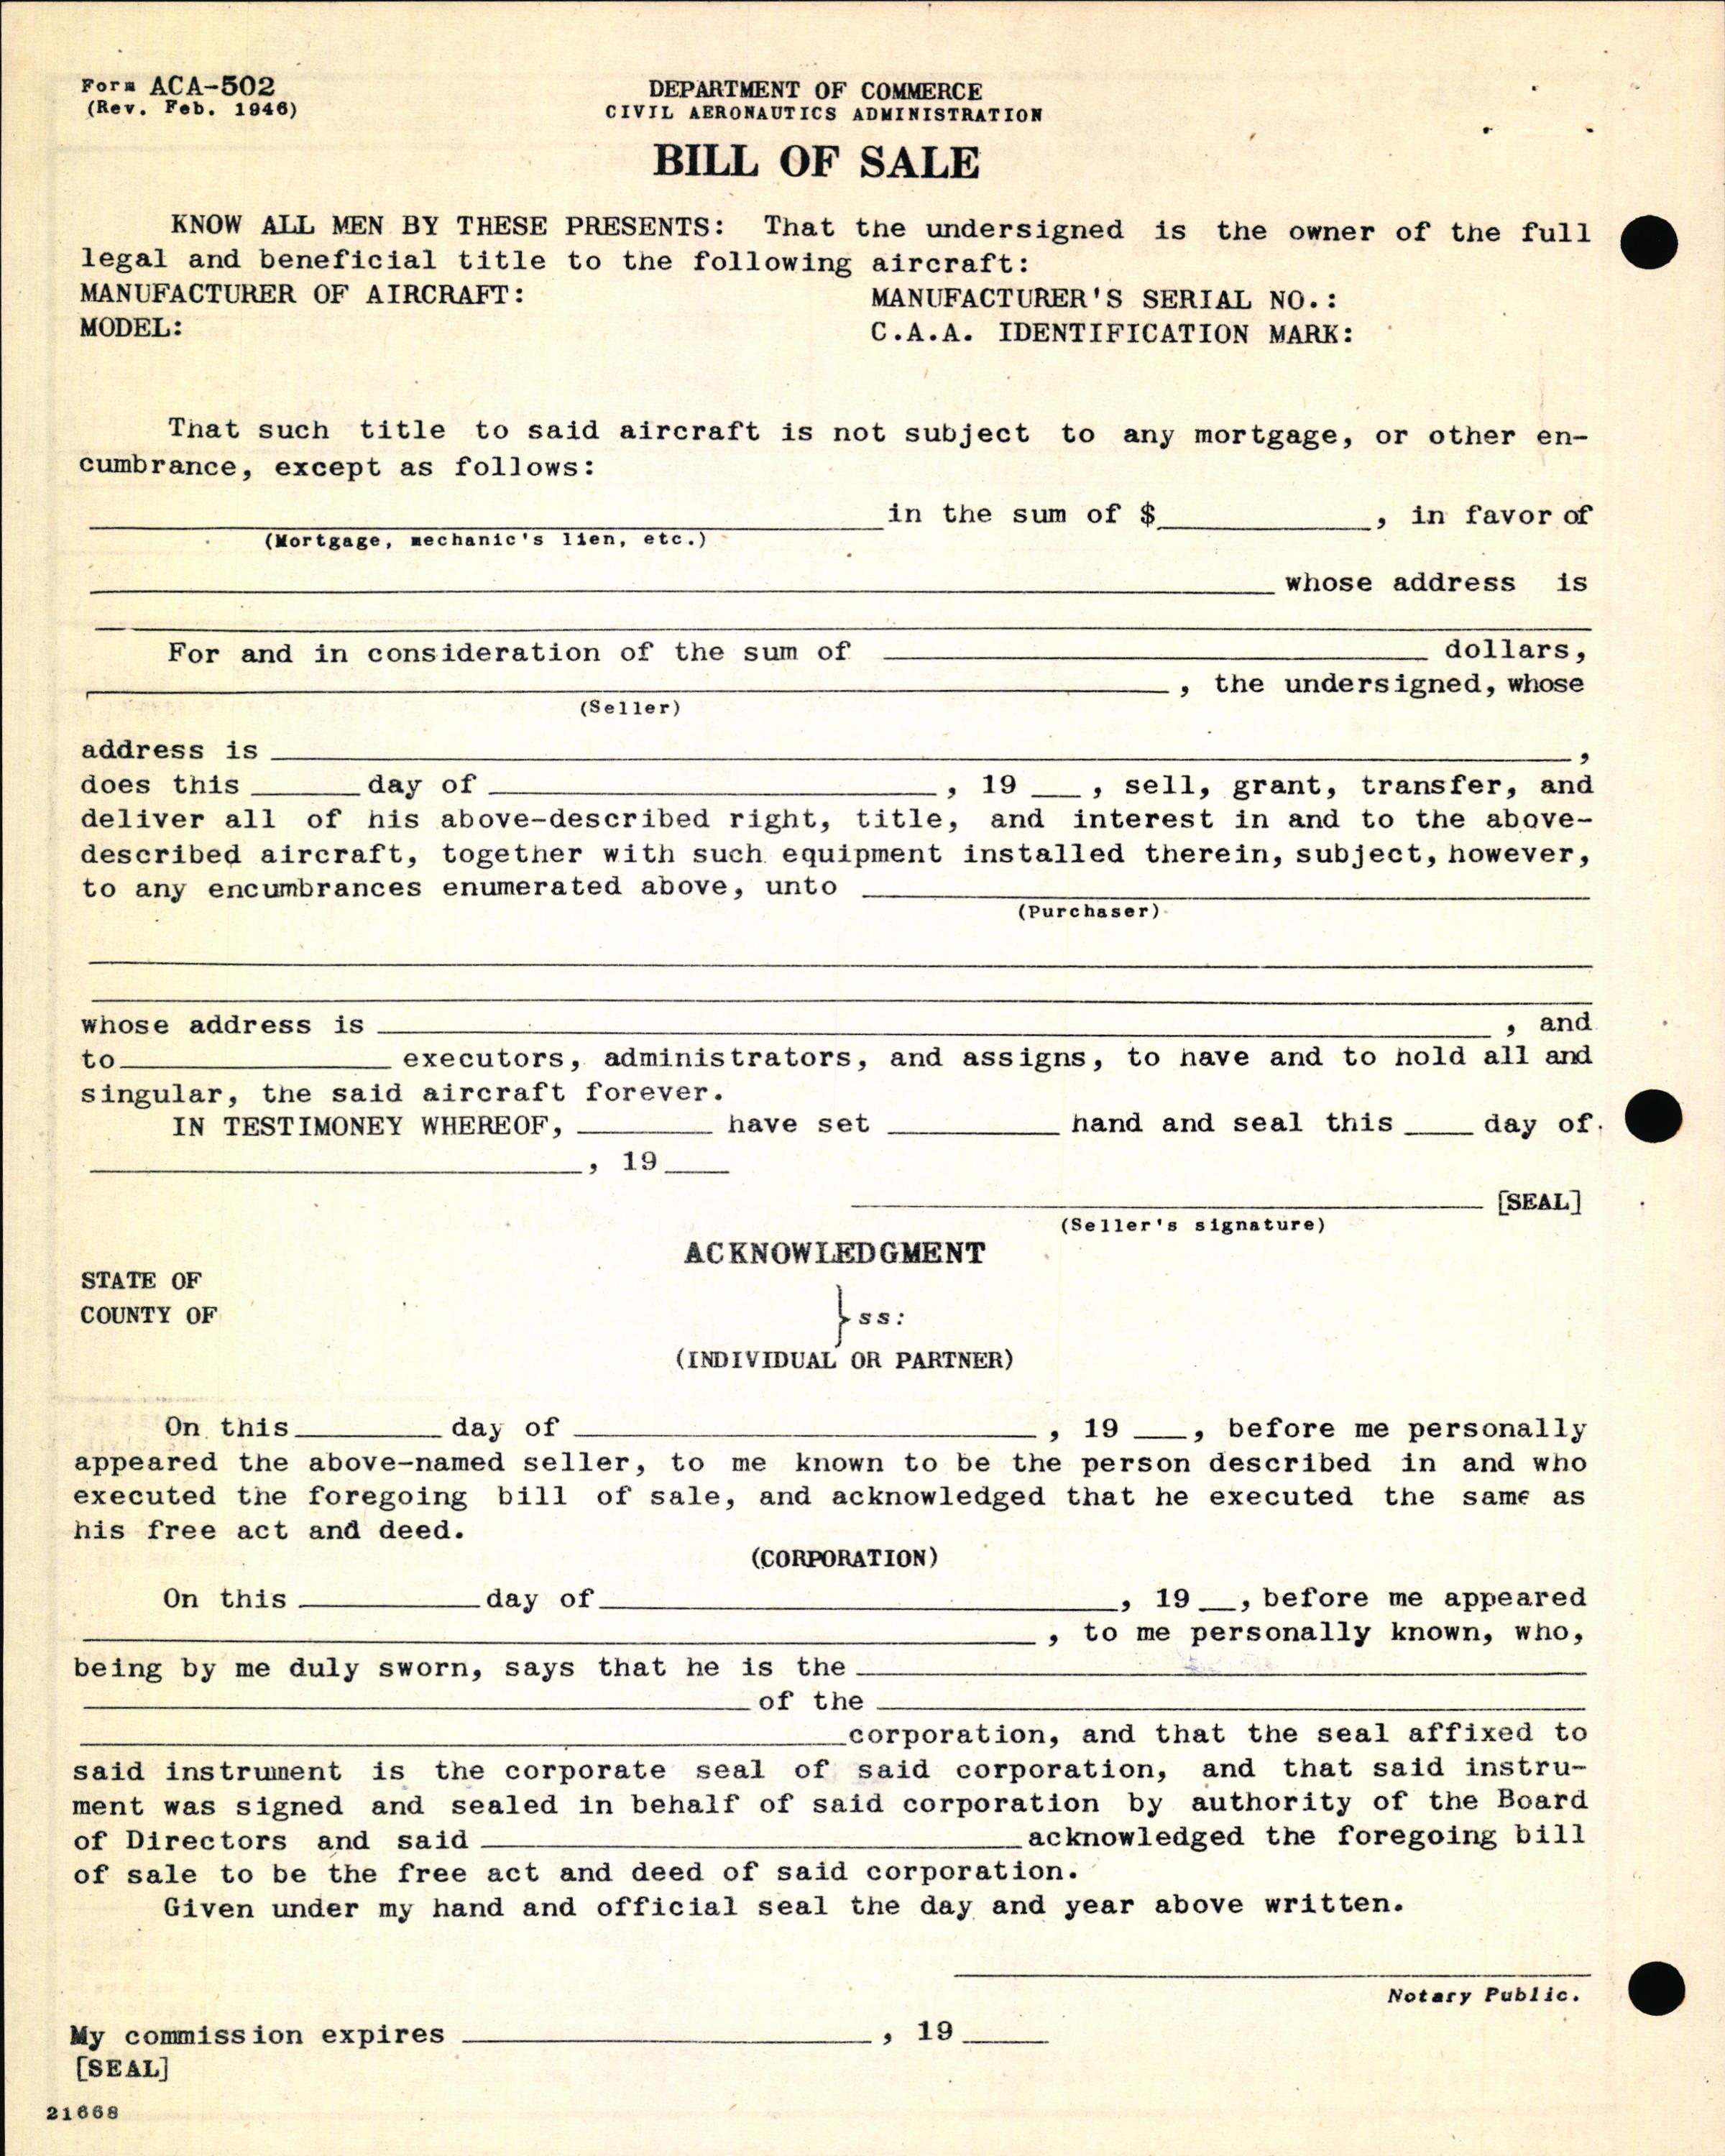 Sample page 6 from AirCorps Library document: Technical Information for Serial Number 1242